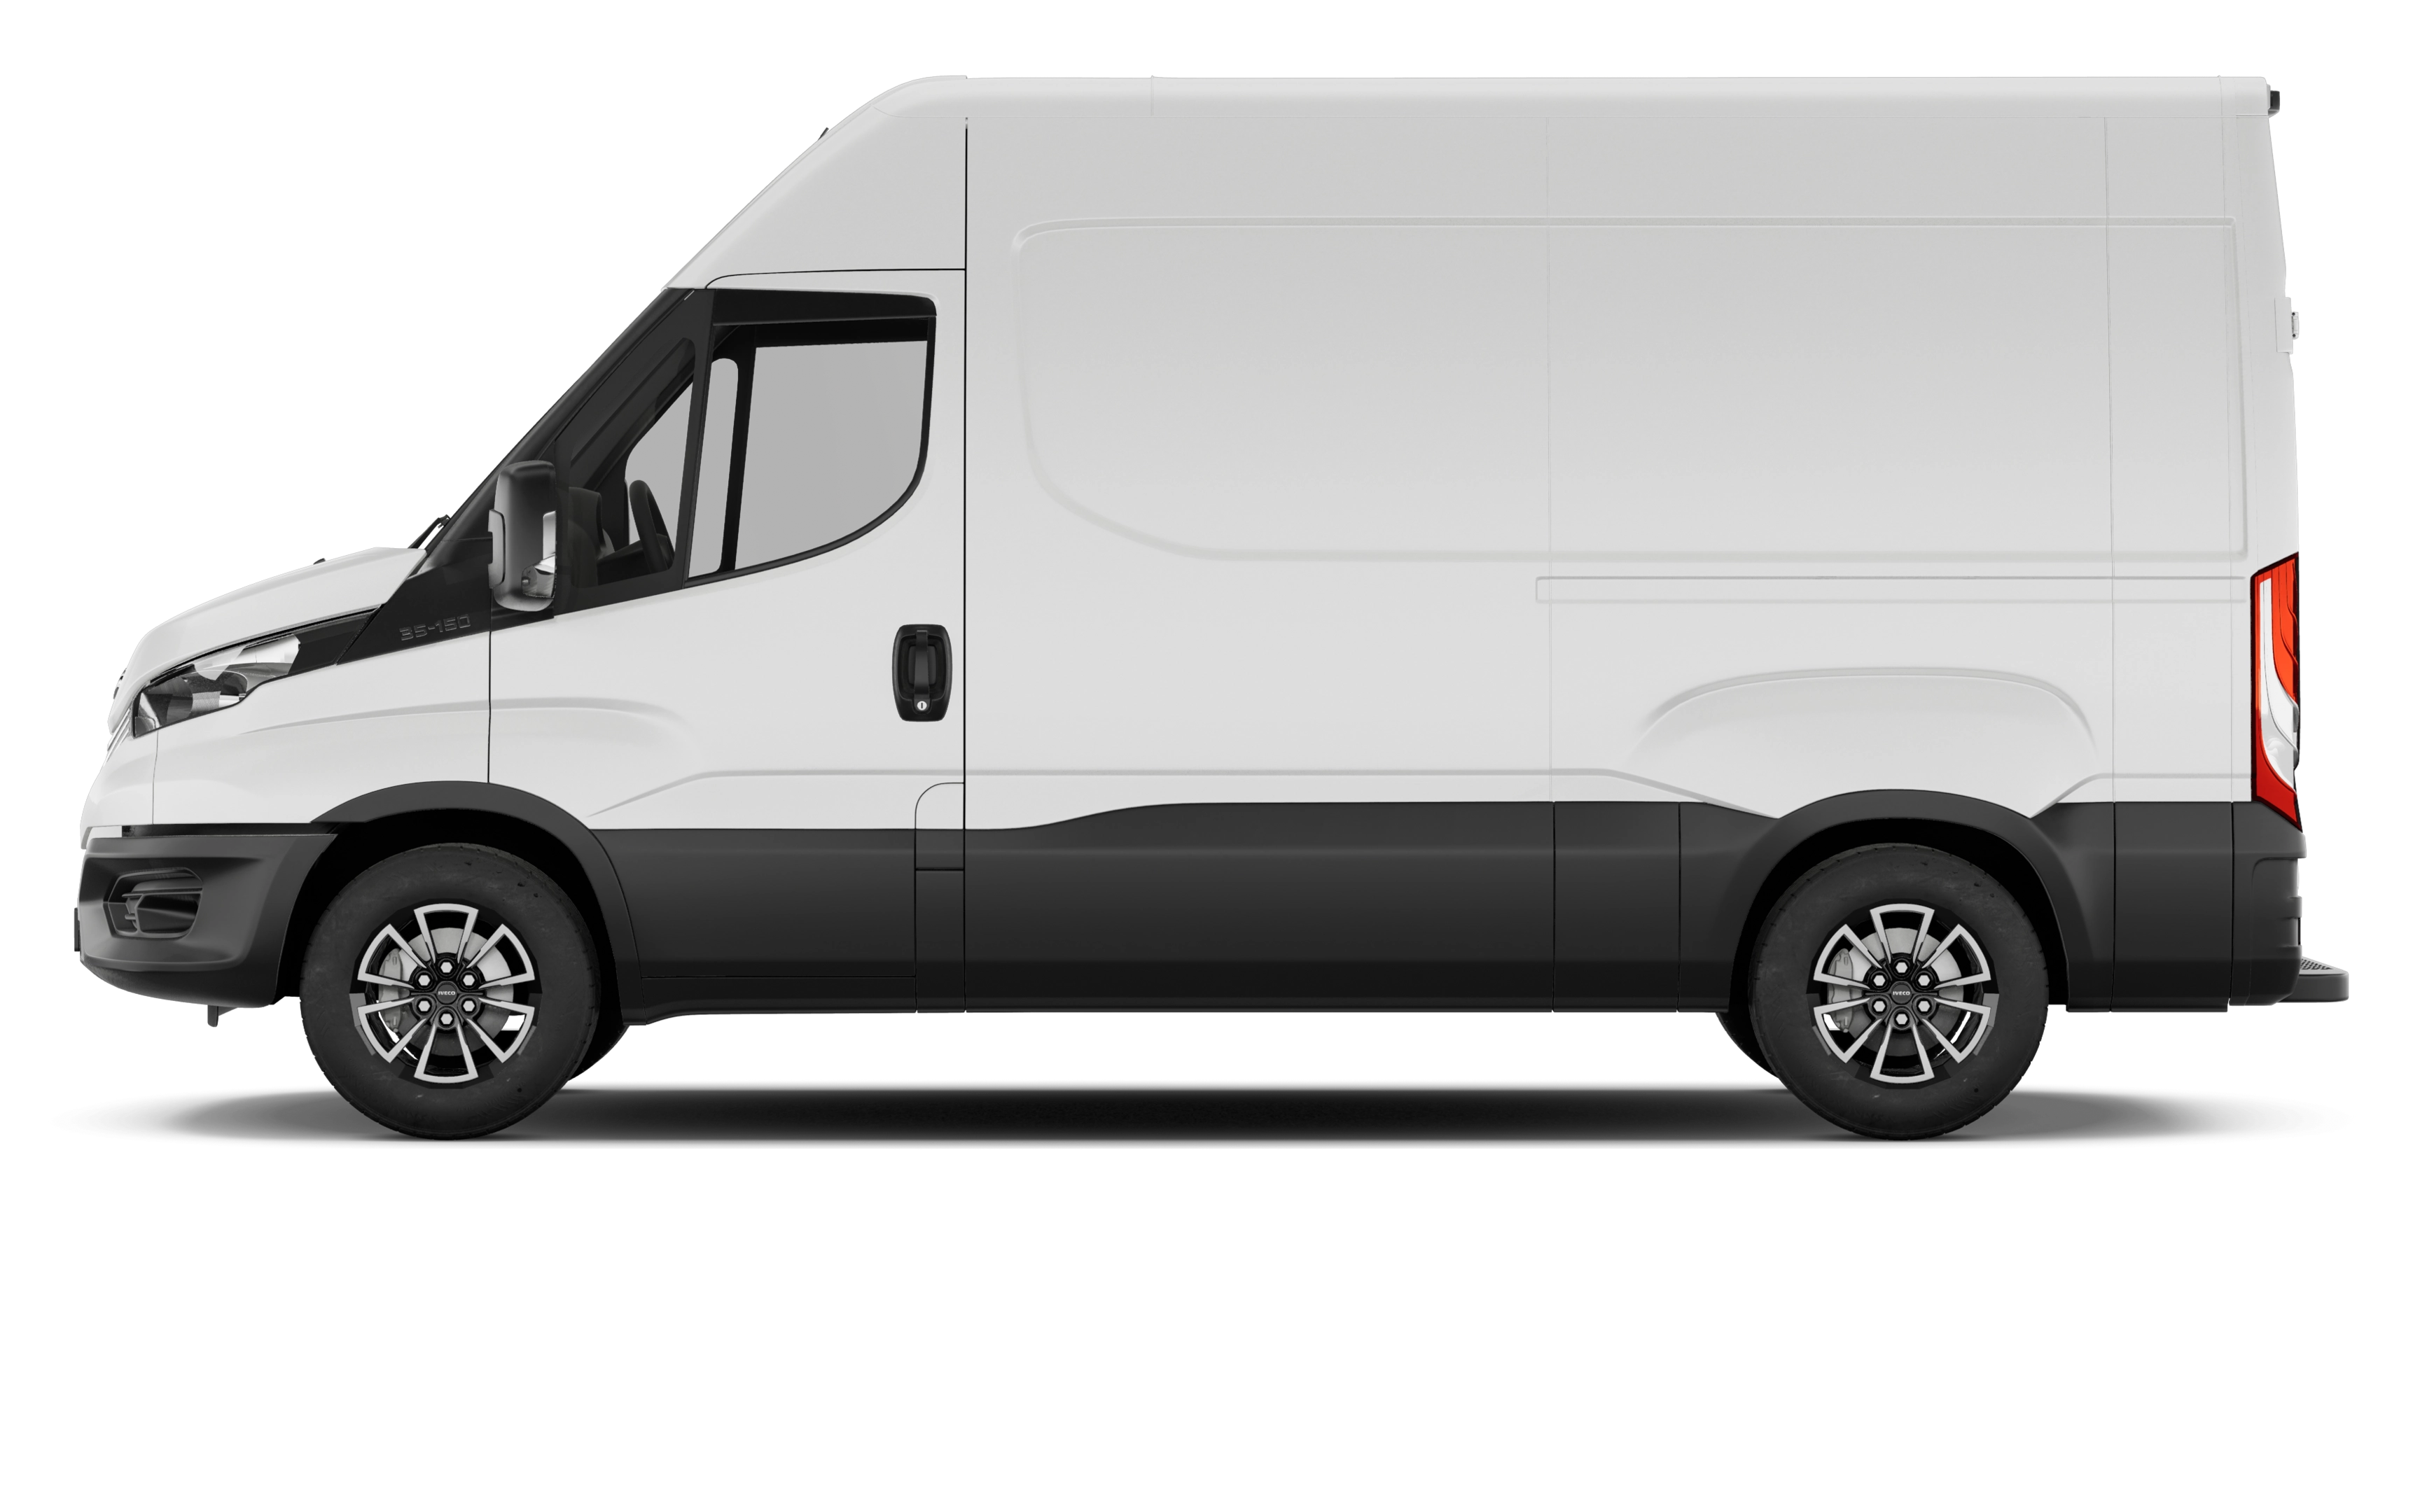 Iveco edaily 35s14 electric 140kw 74kwh high roof van 4100 wb auto